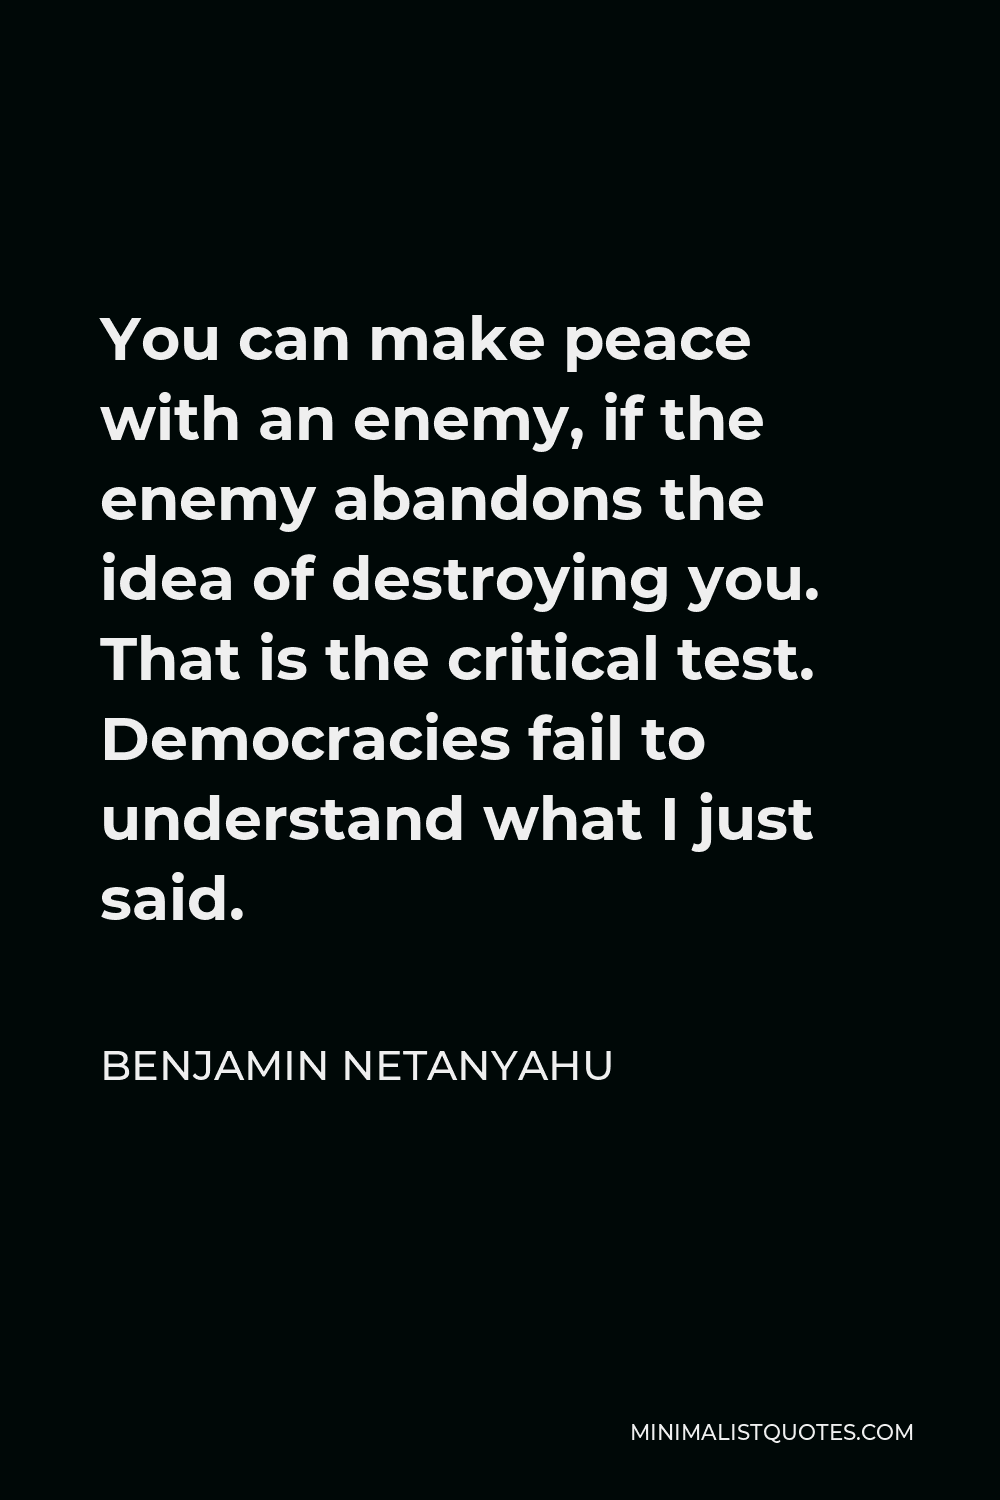 Benjamin Netanyahu Quote - You can make peace with an enemy, if the enemy abandons the idea of destroying you. That is the critical test. Democracies fail to understand what I just said.